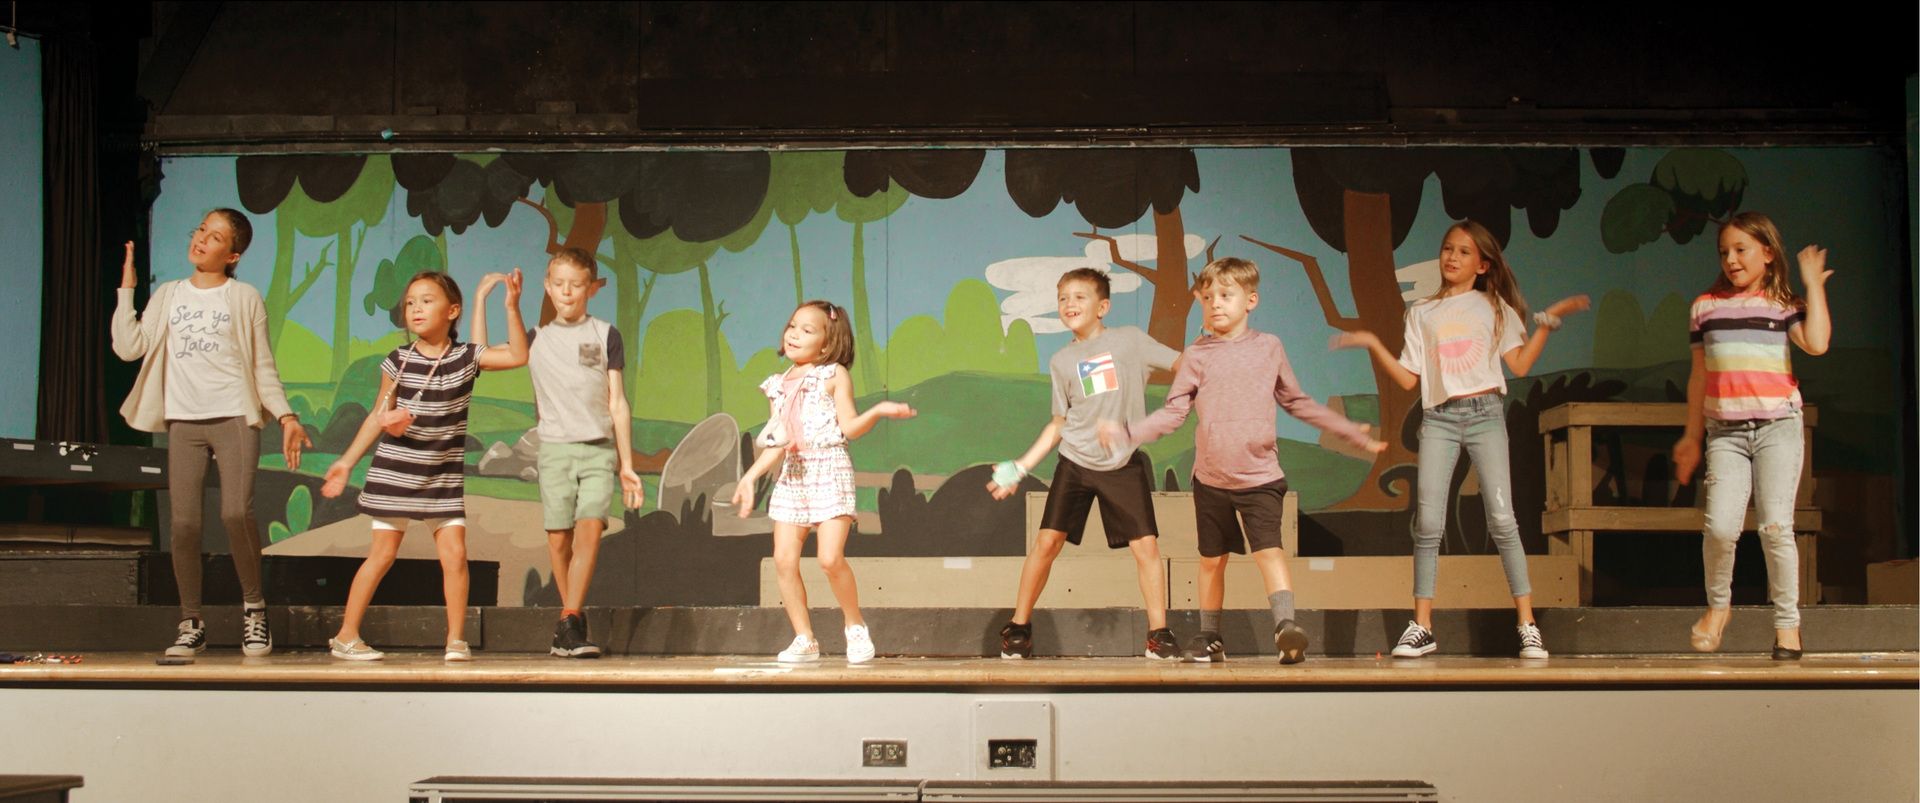 A group of children standing on a stage.